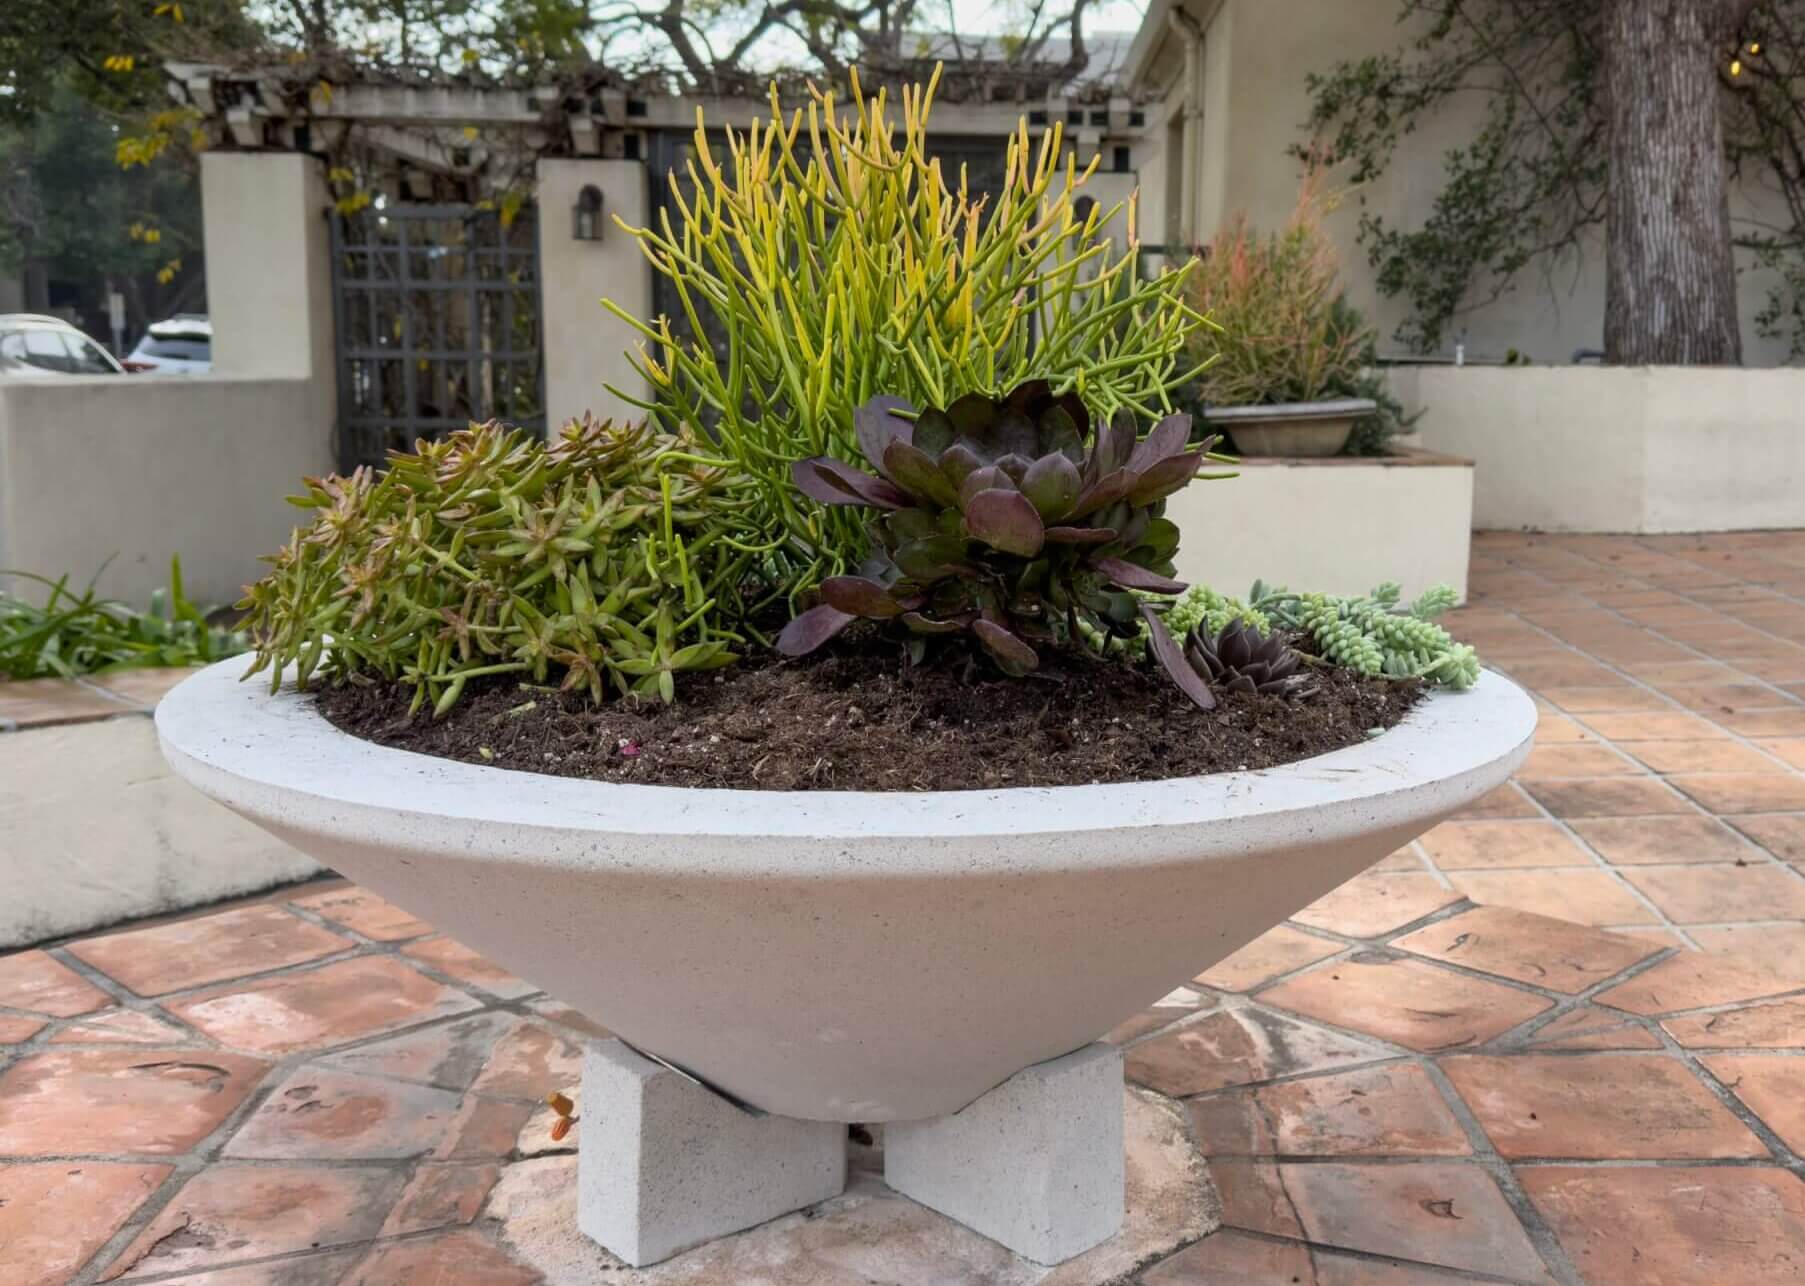 Newly planted chalice planter